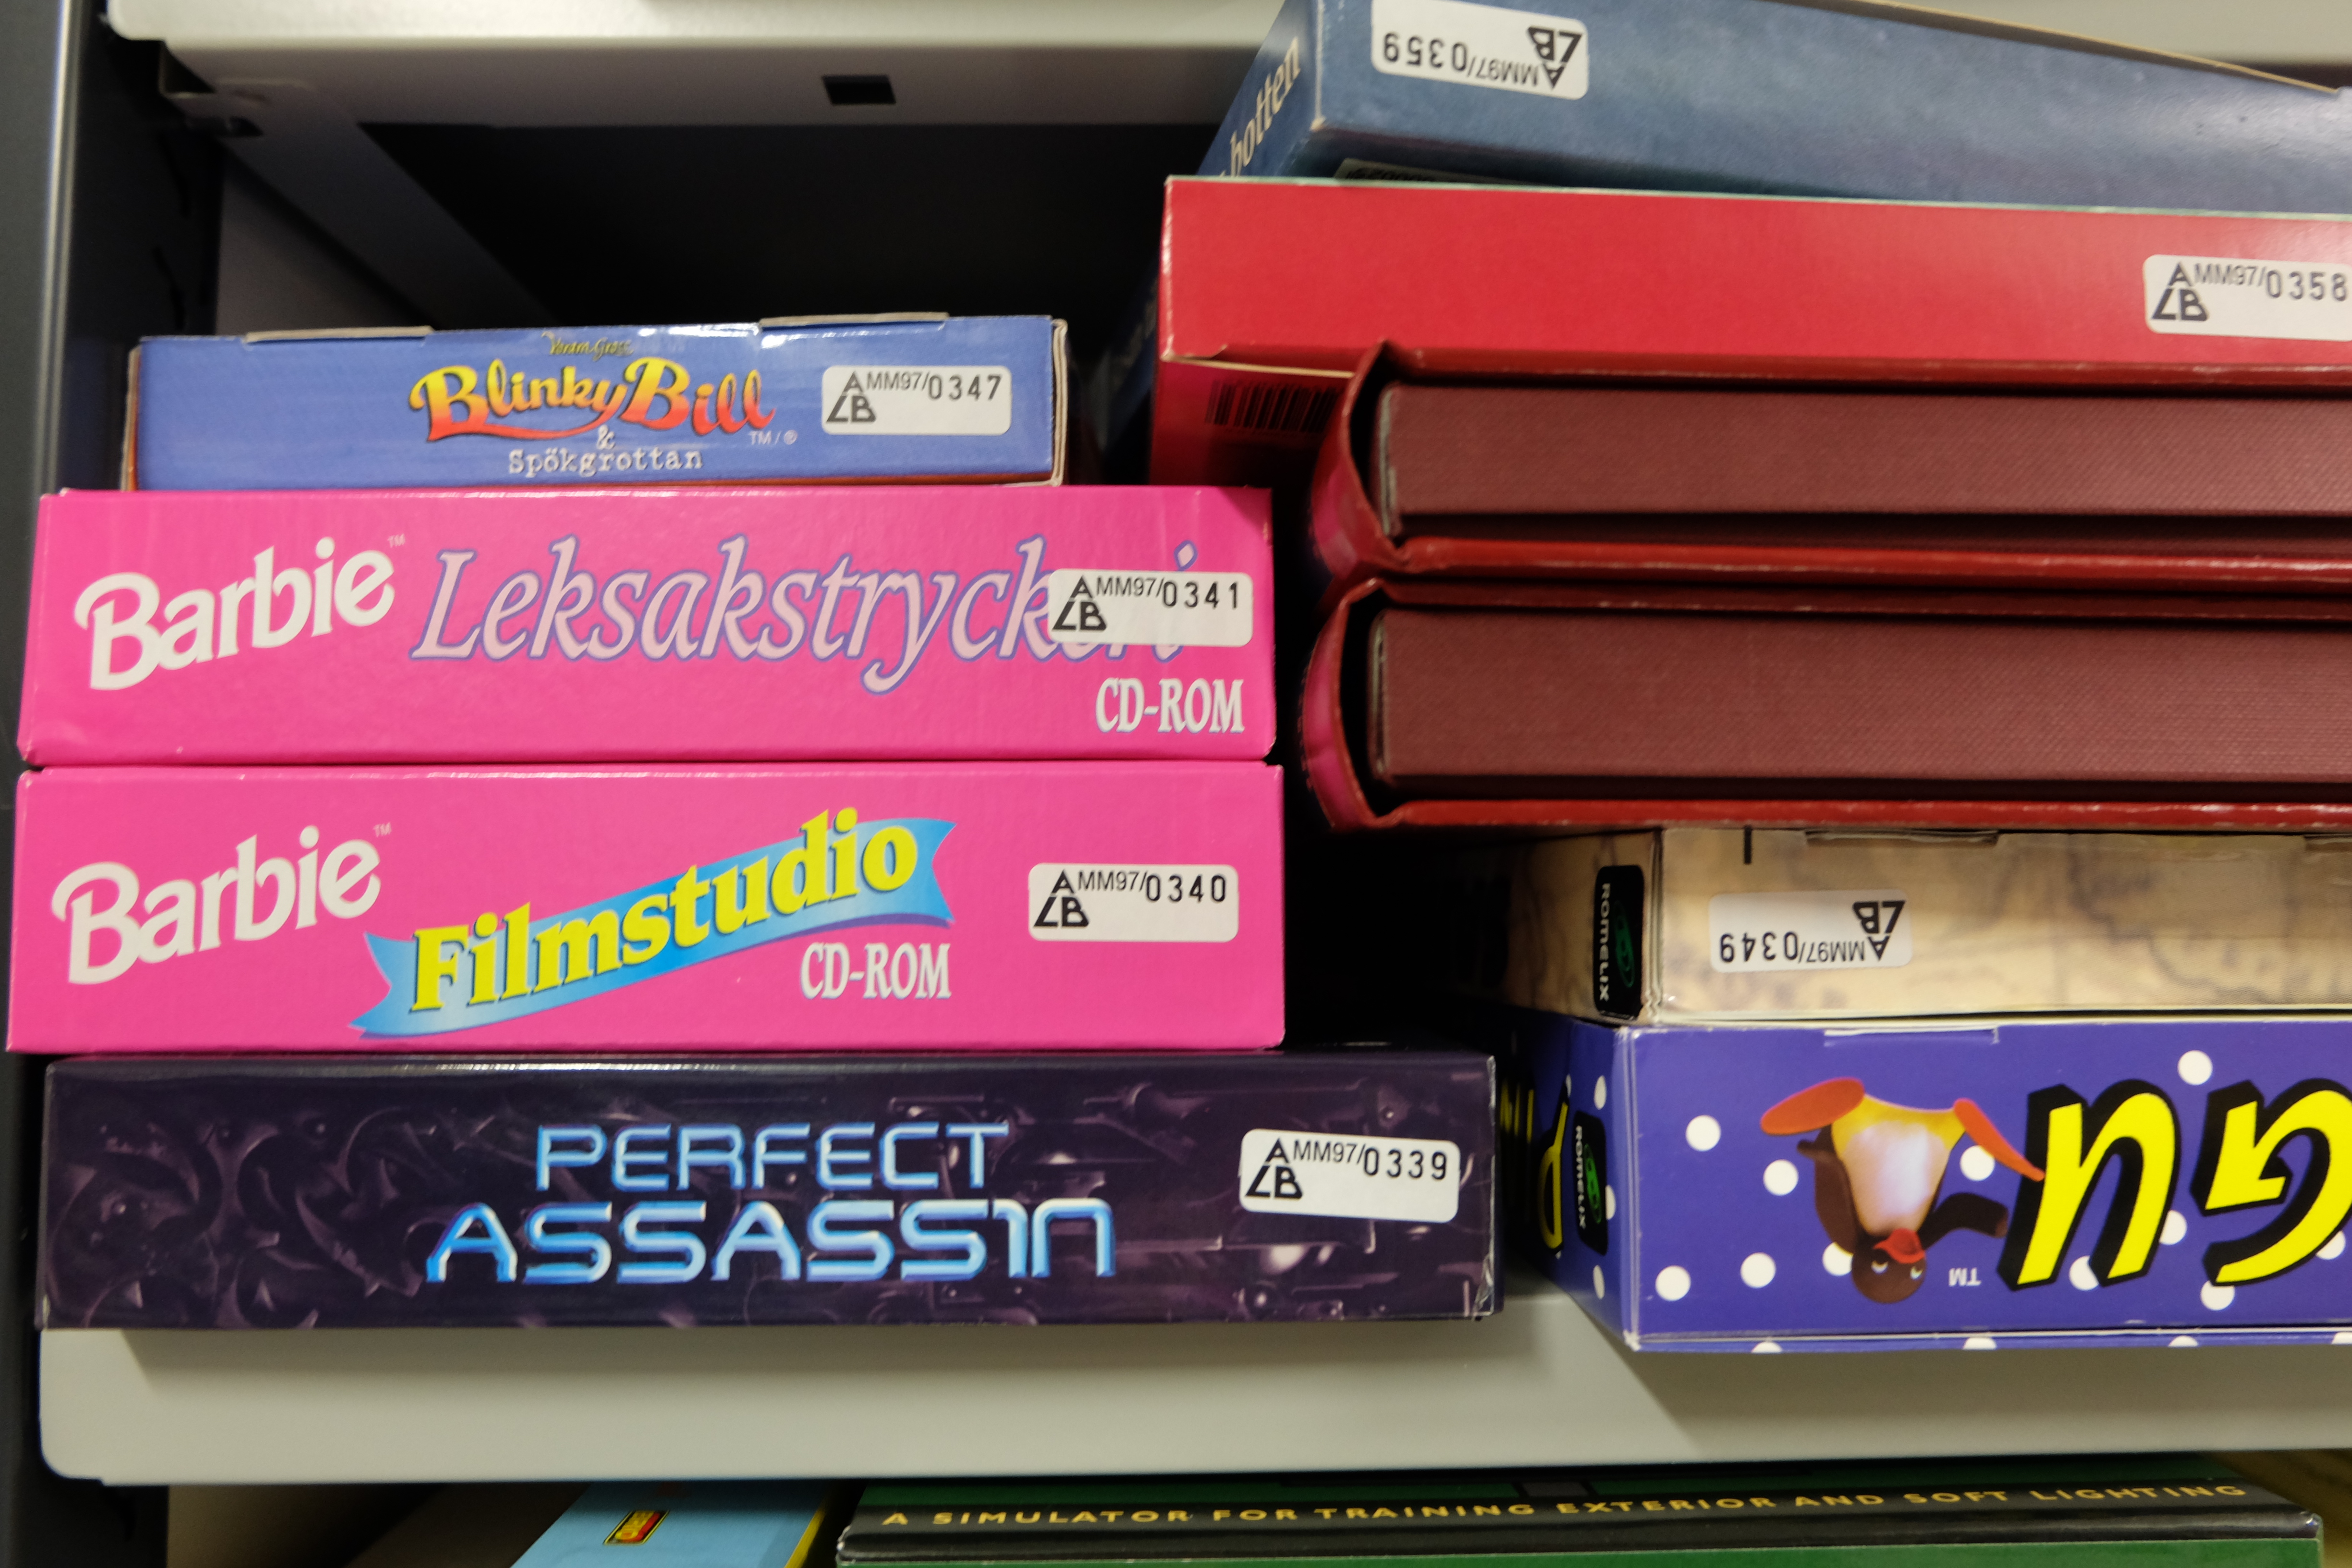 Shelf with computer games. At the front are some pink covers with the text "Barbie".